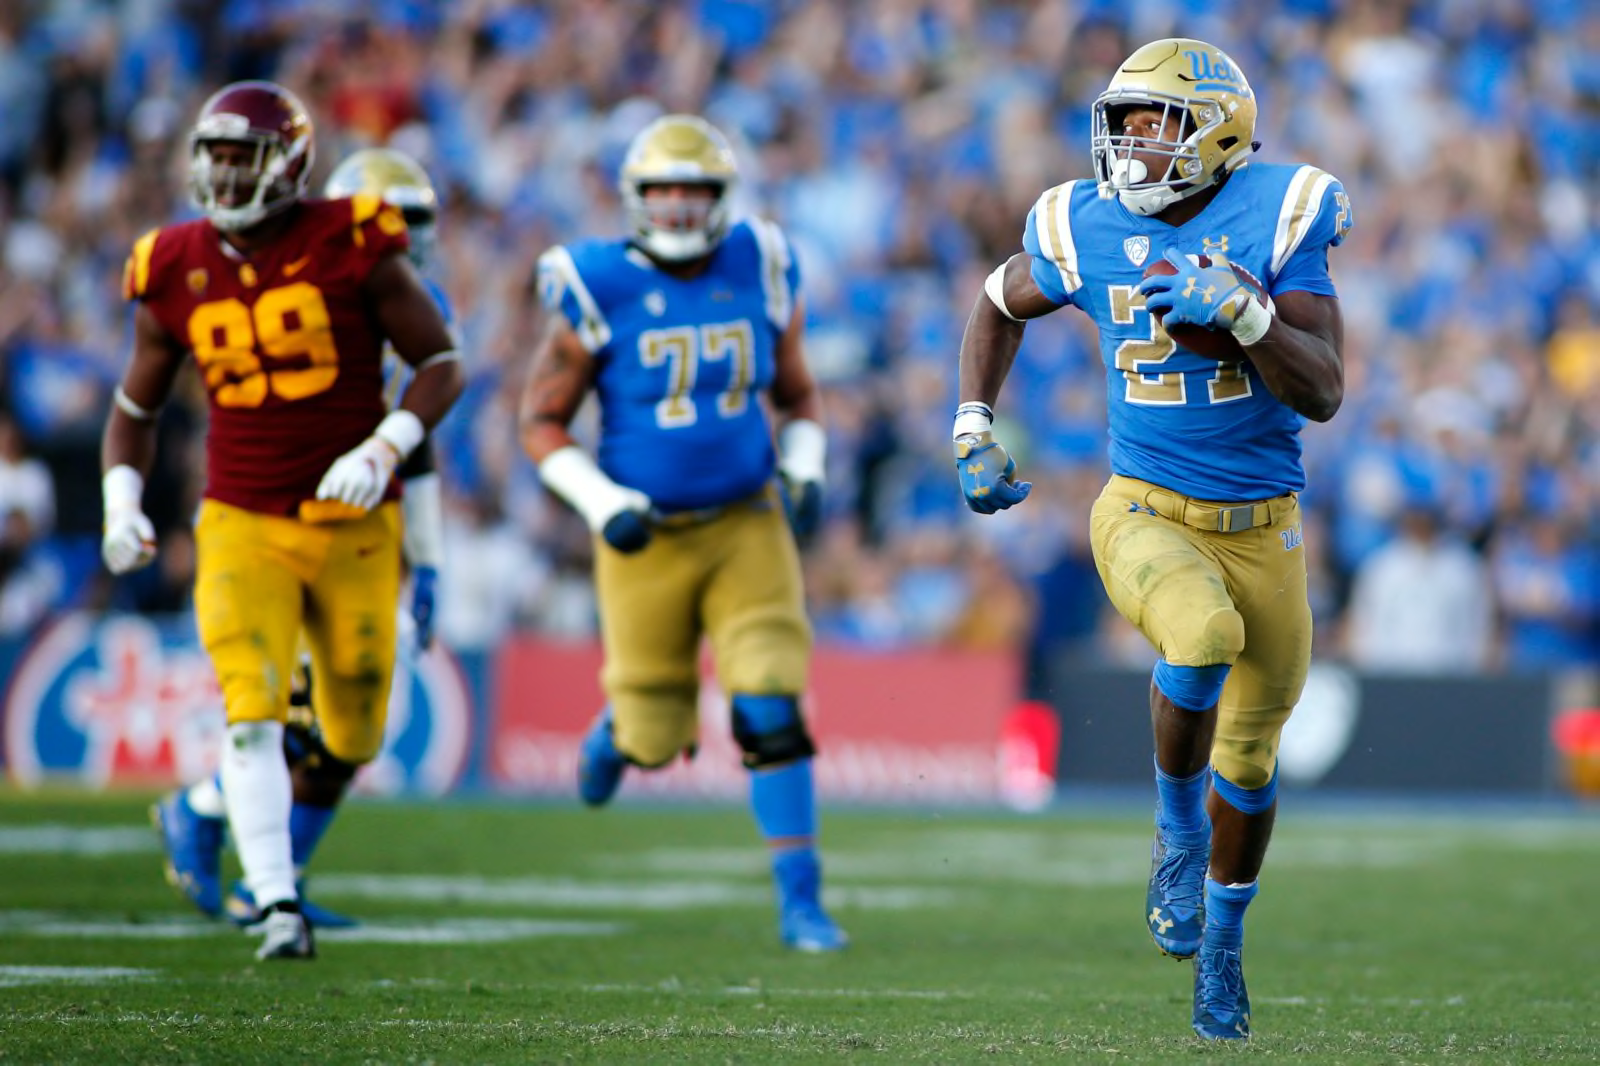 UCLA Football: 10 Bruins that could be 